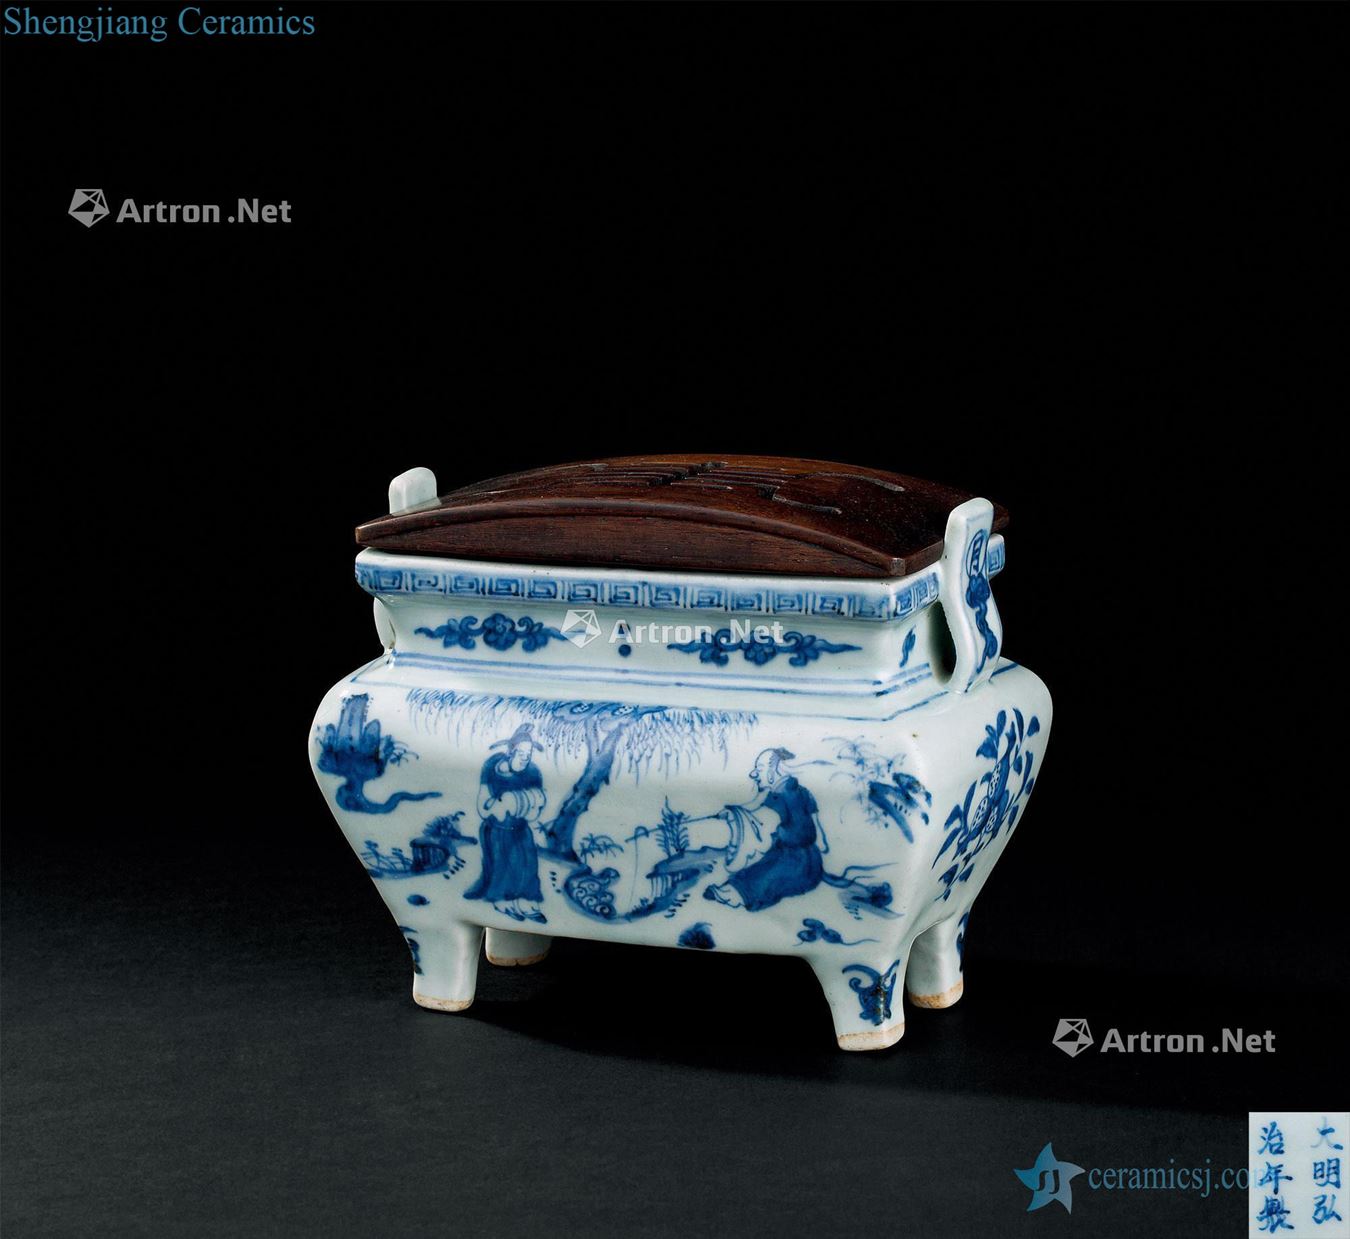 In the Ming dynasty (1368-1644) blue and white character wen ding incense burner